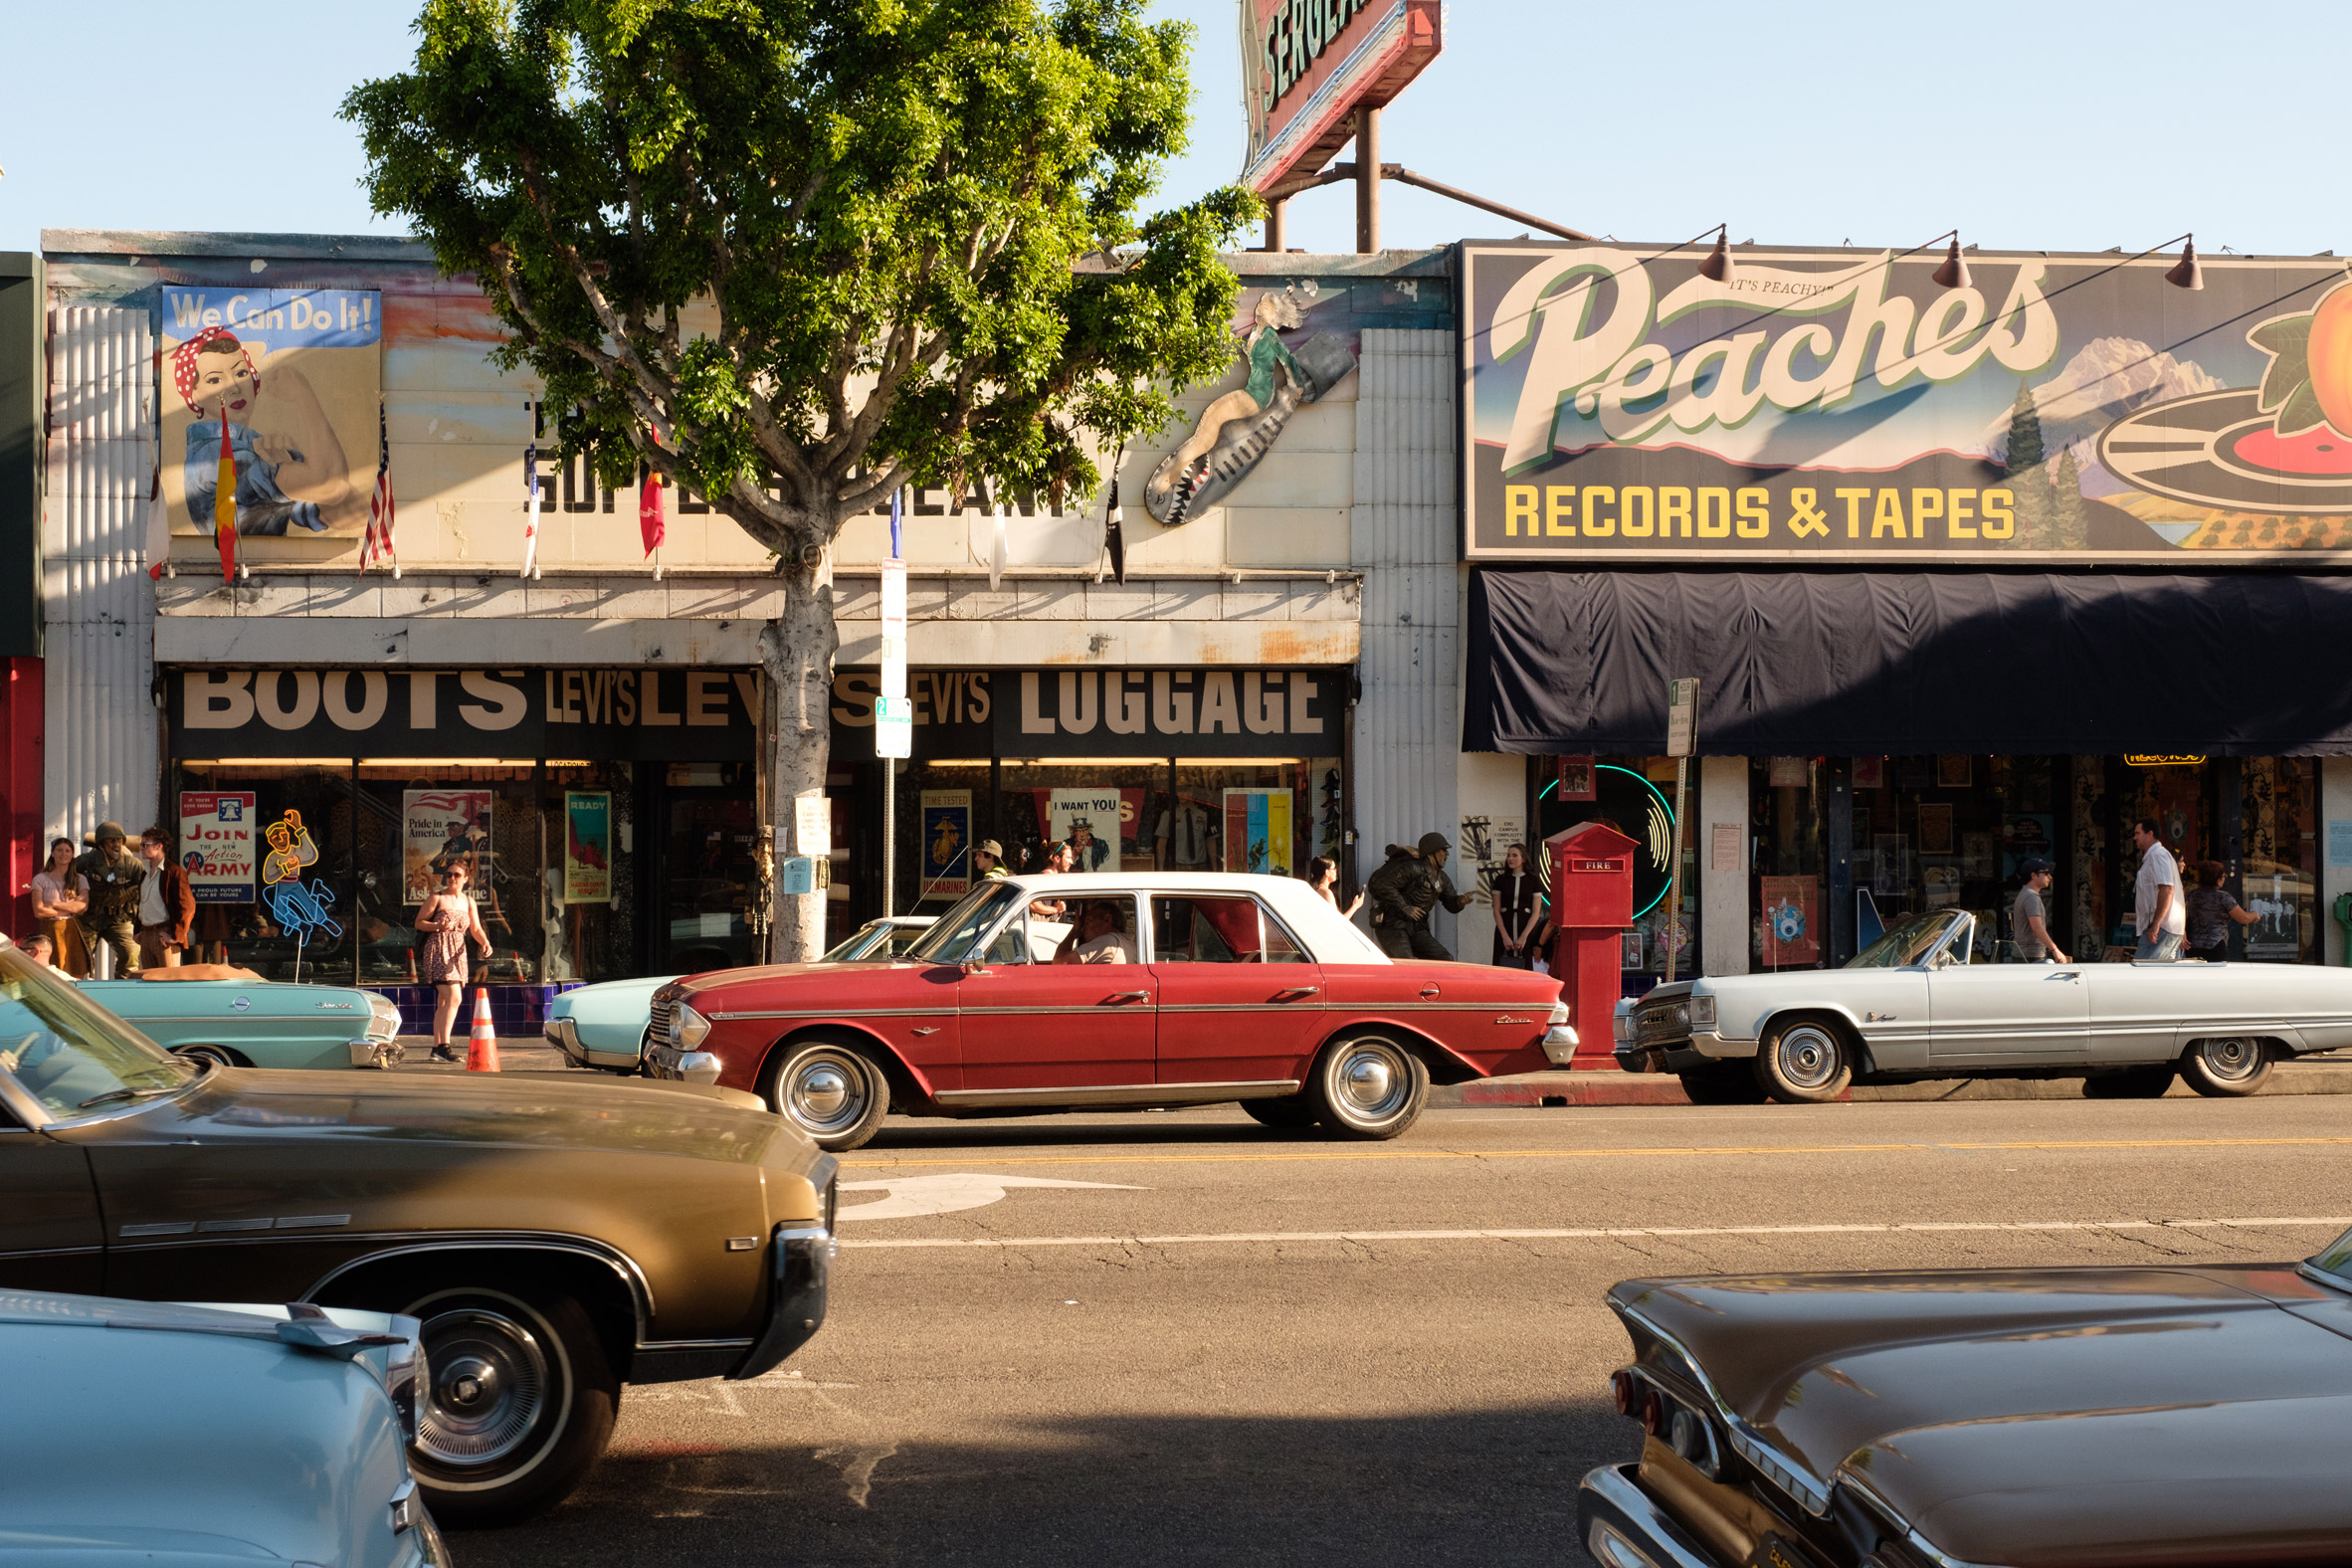 Set design by Quentin Tarantino's Once Upon a Time in Hollywood movie